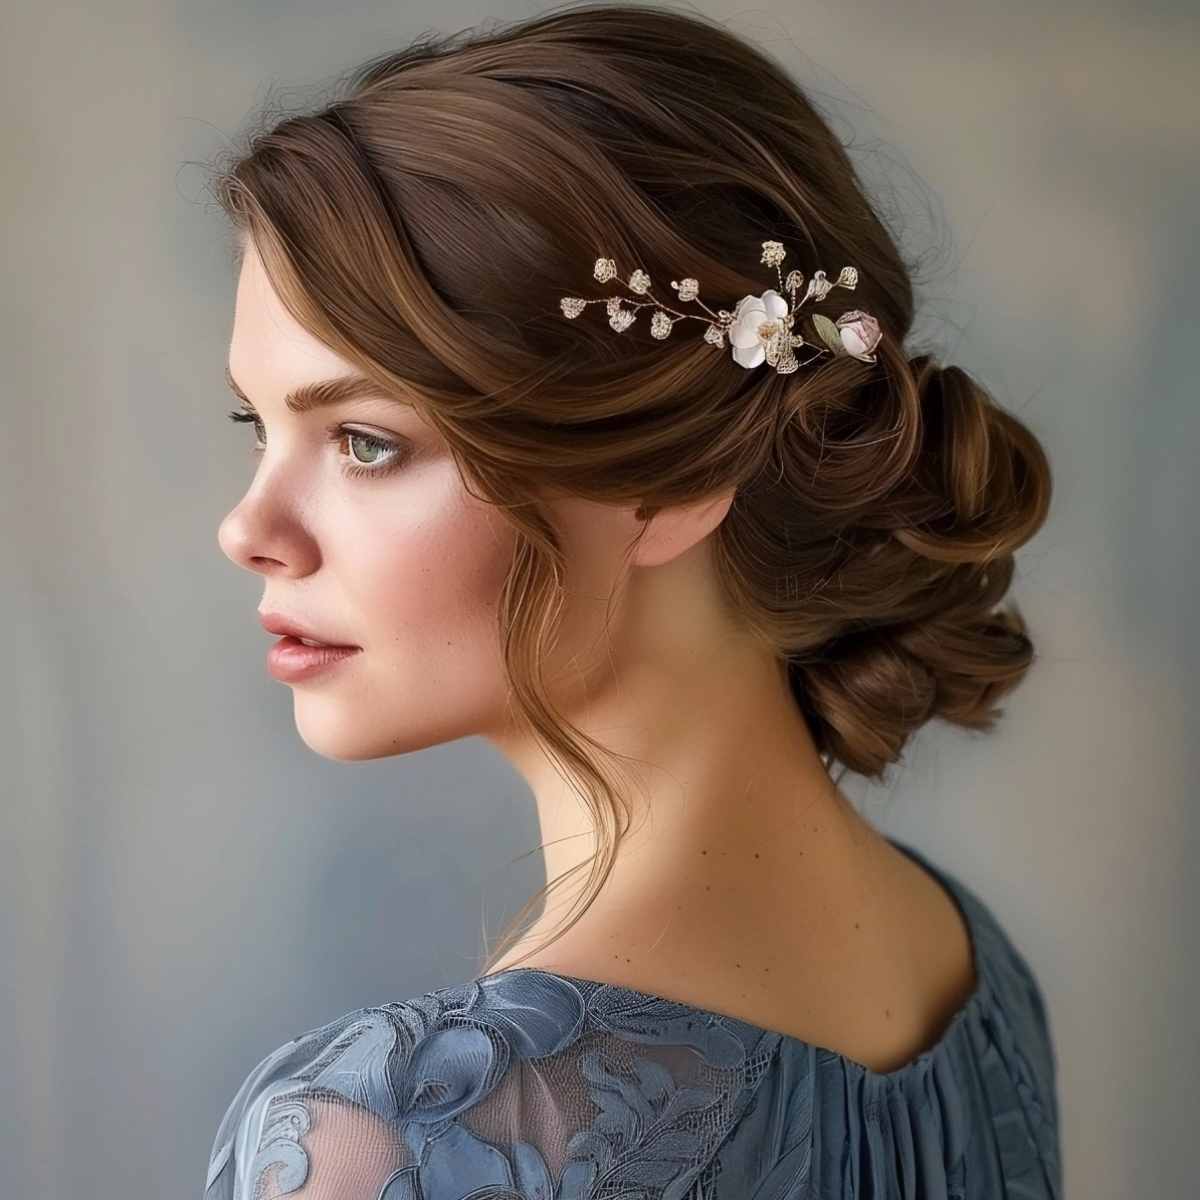 Beautiful Floral Hair Pin Prom Updo